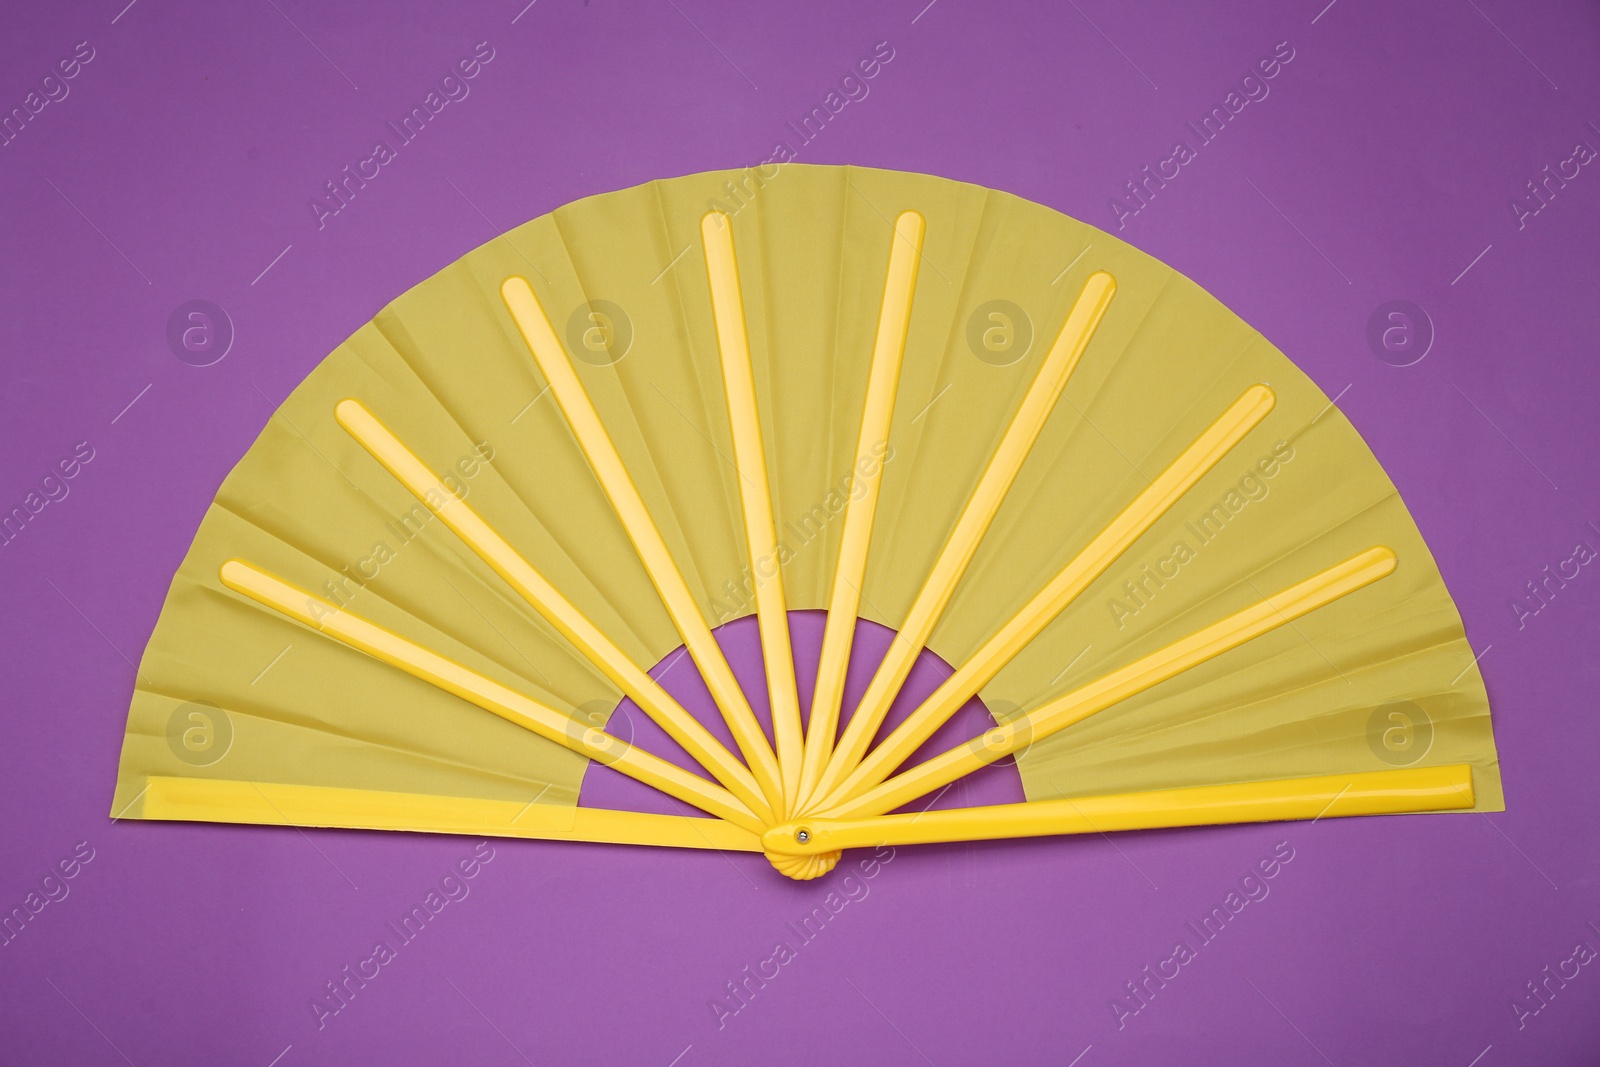 Photo of Bright yellow hand fan on purple background, top view